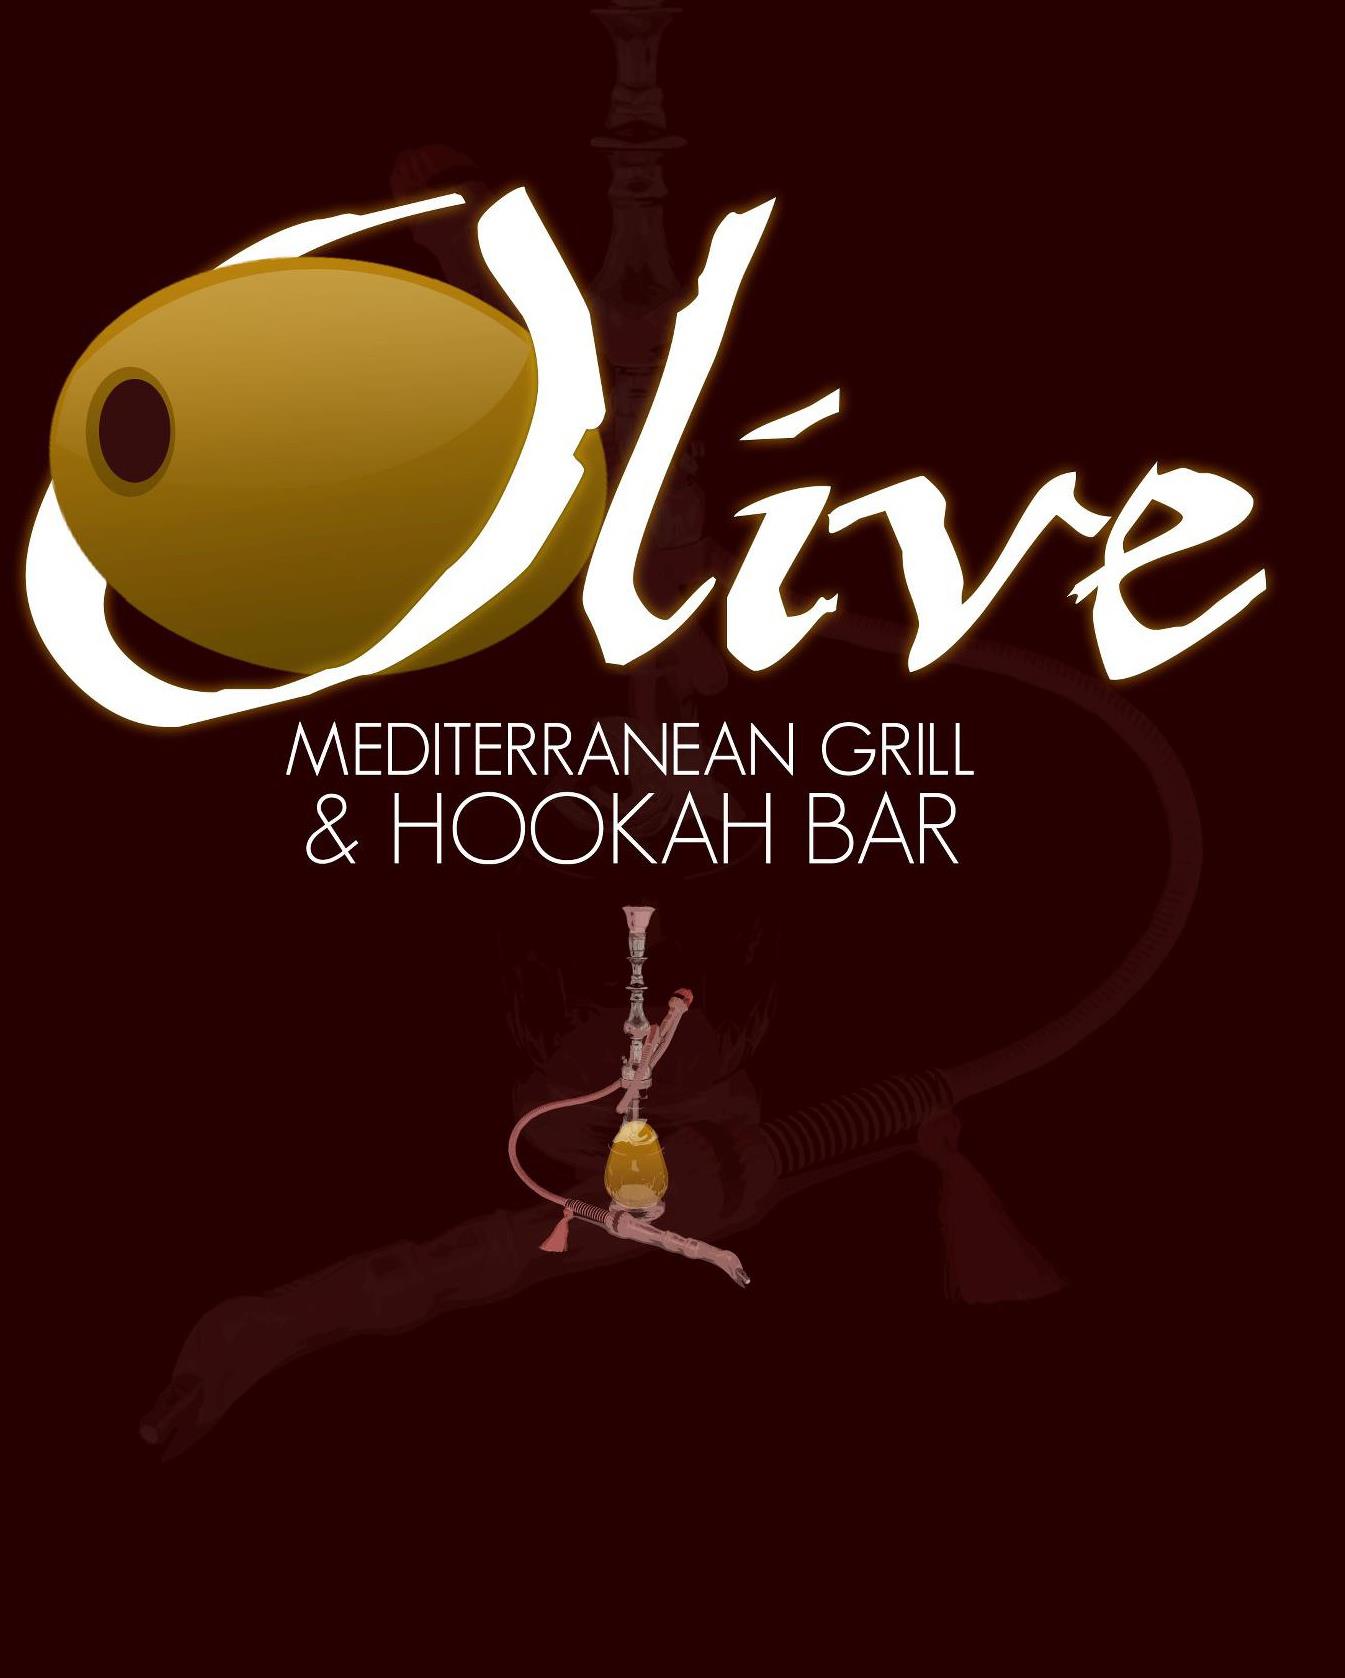 Business logo of The Olive Mediterranean Grill and Hookah Lounge